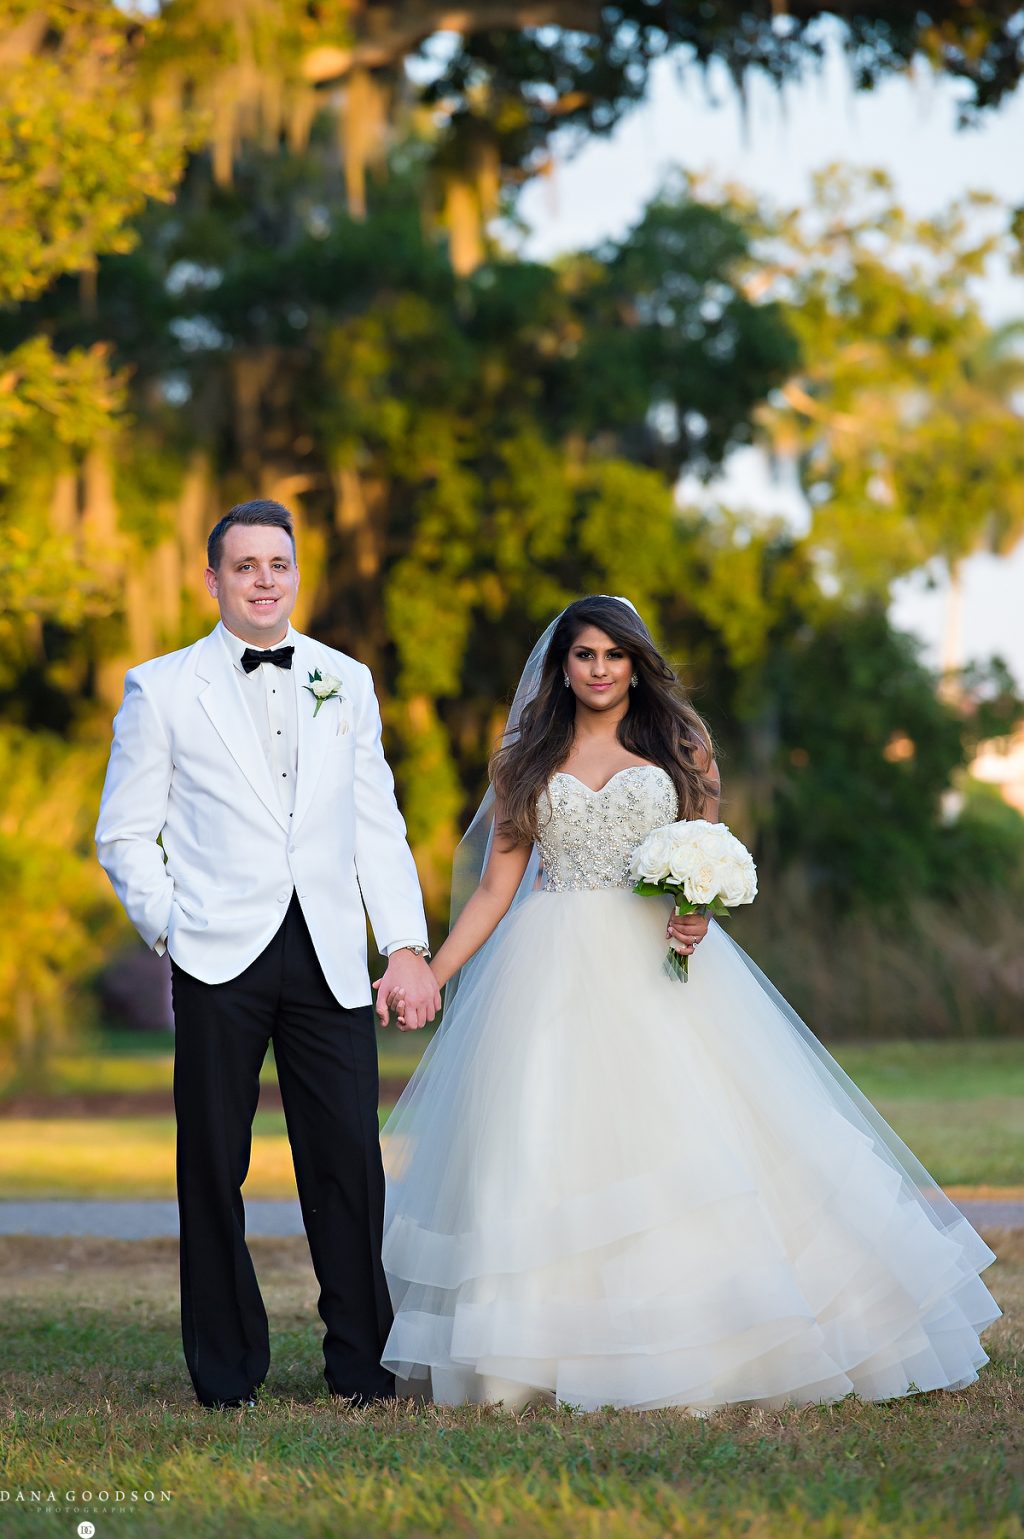 Ringling Museum wedding with Bride and Groom